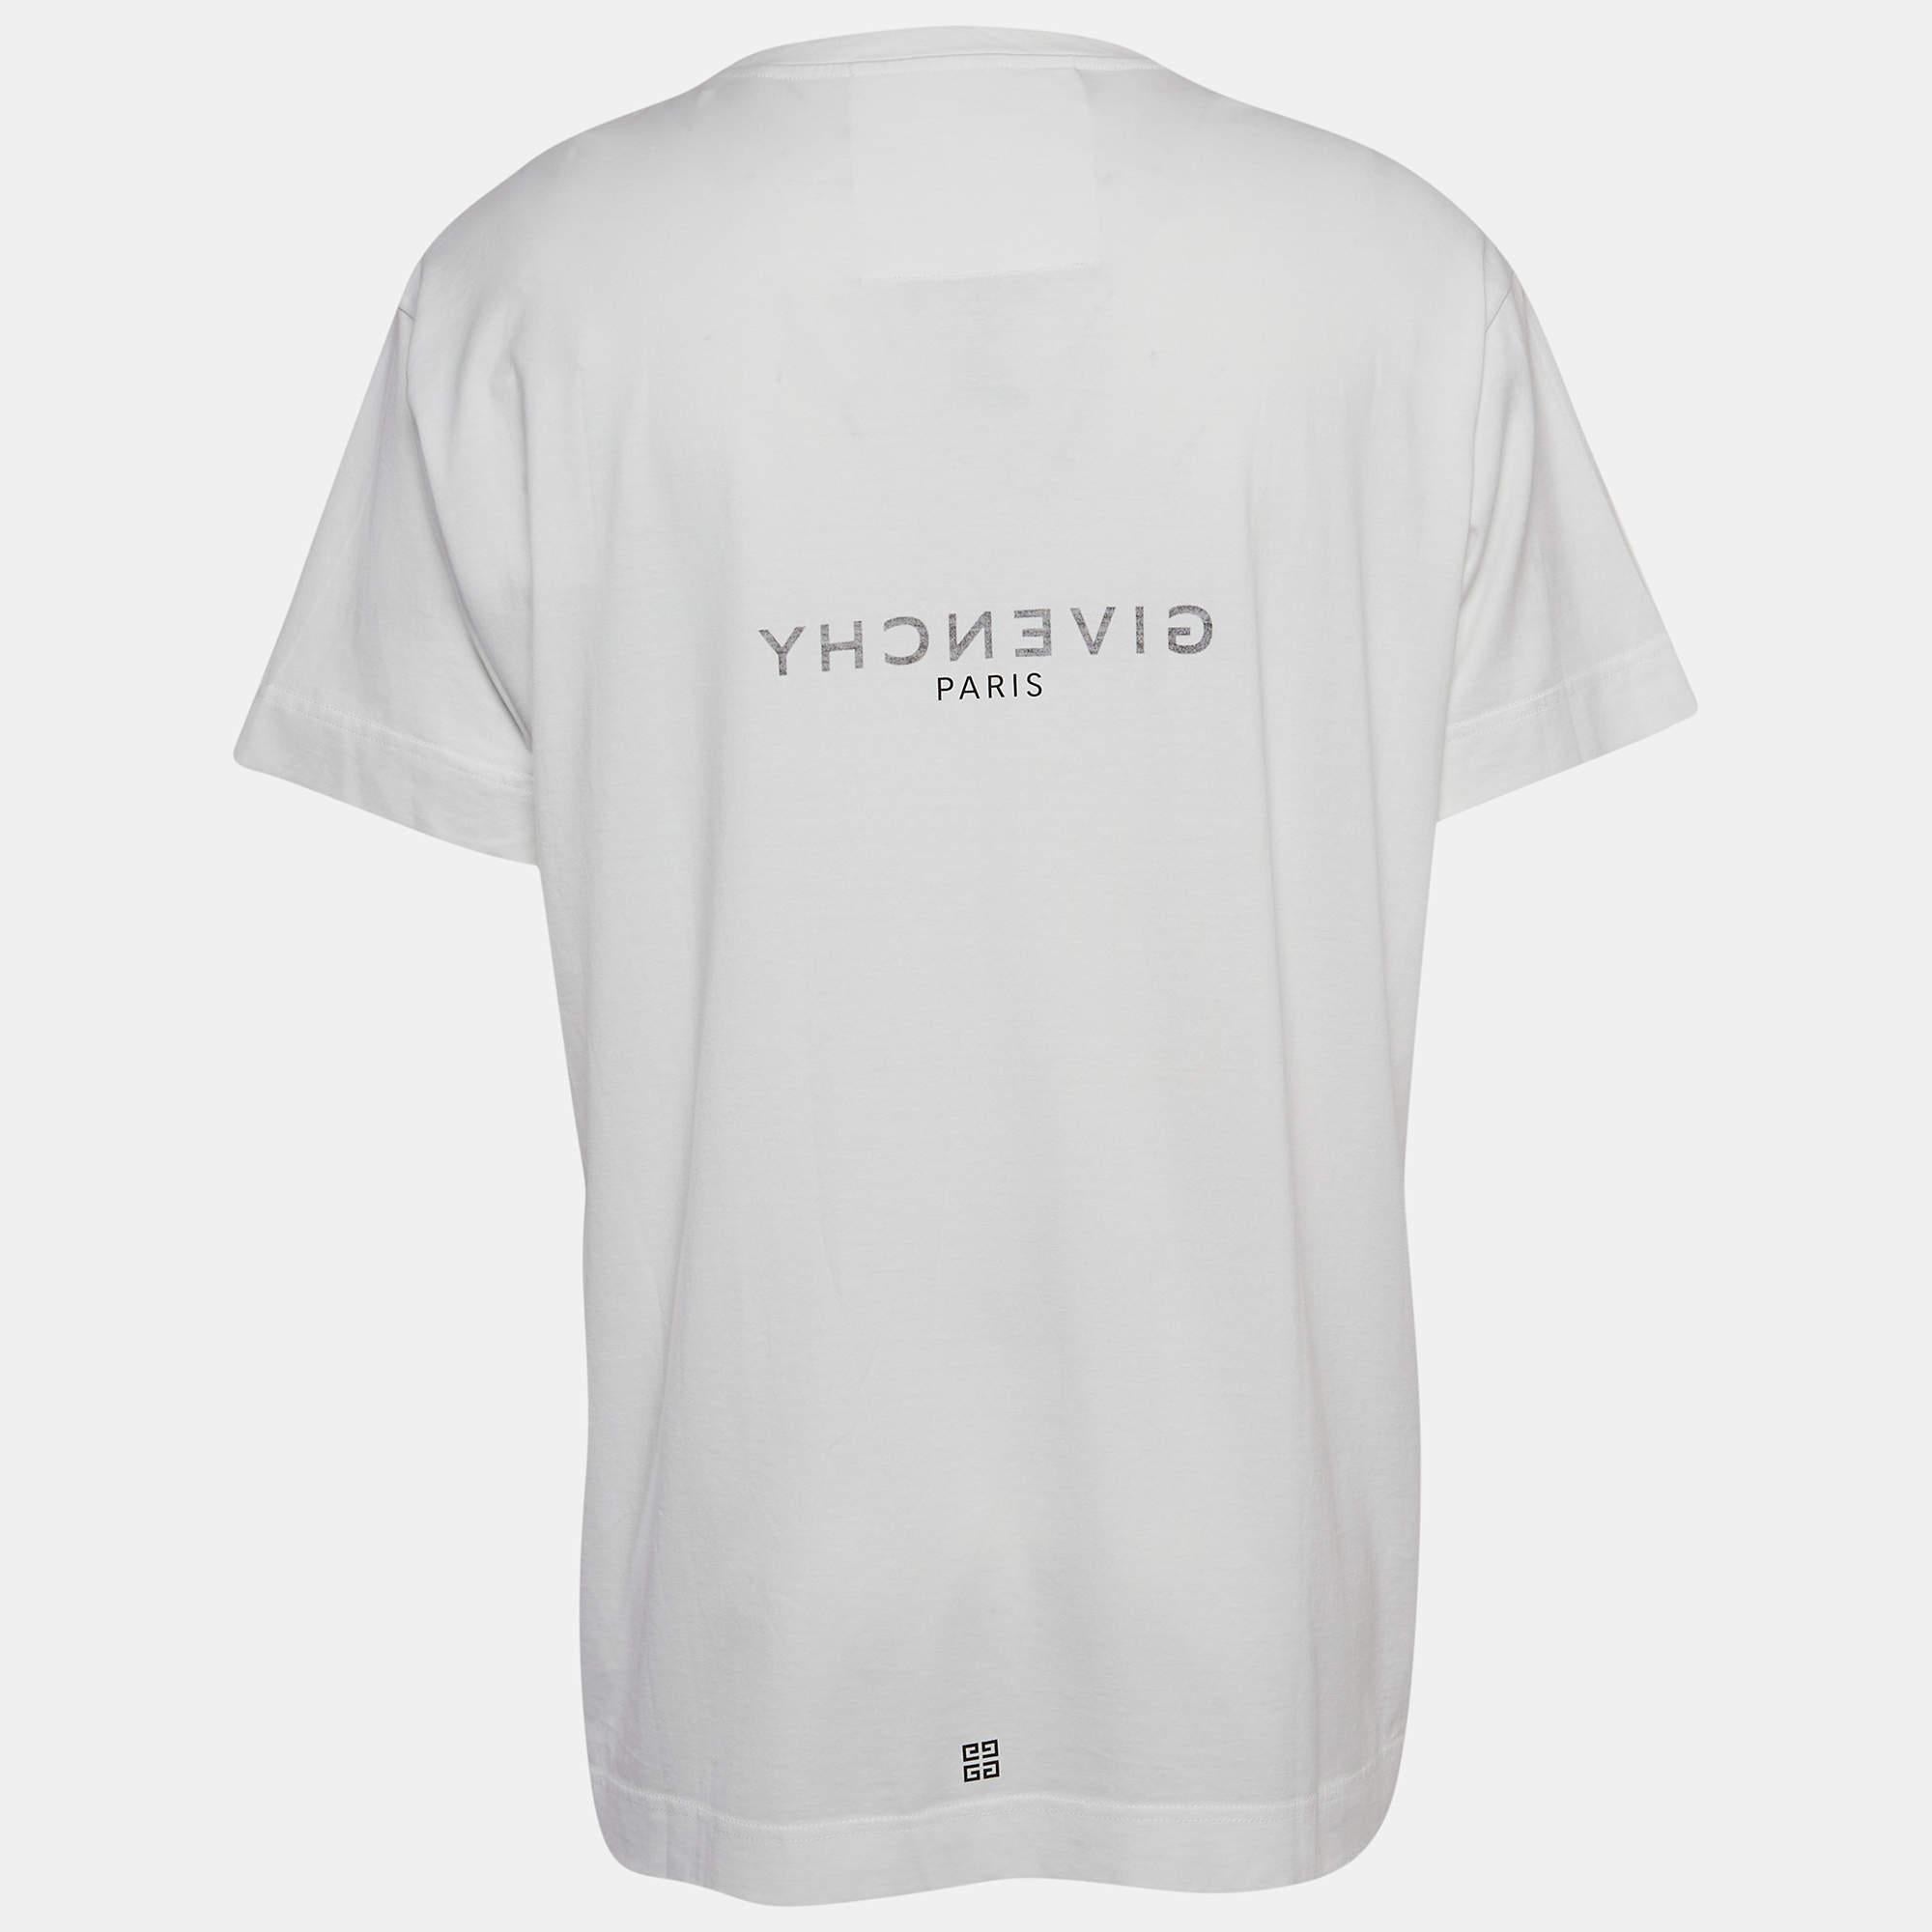 A perfect combination of comfort, luxury, and style, this Givenchy t-shirt is a must-have piece! Made from quality materials, the creation can be styled with denim pants and sneakers for a cool look.

